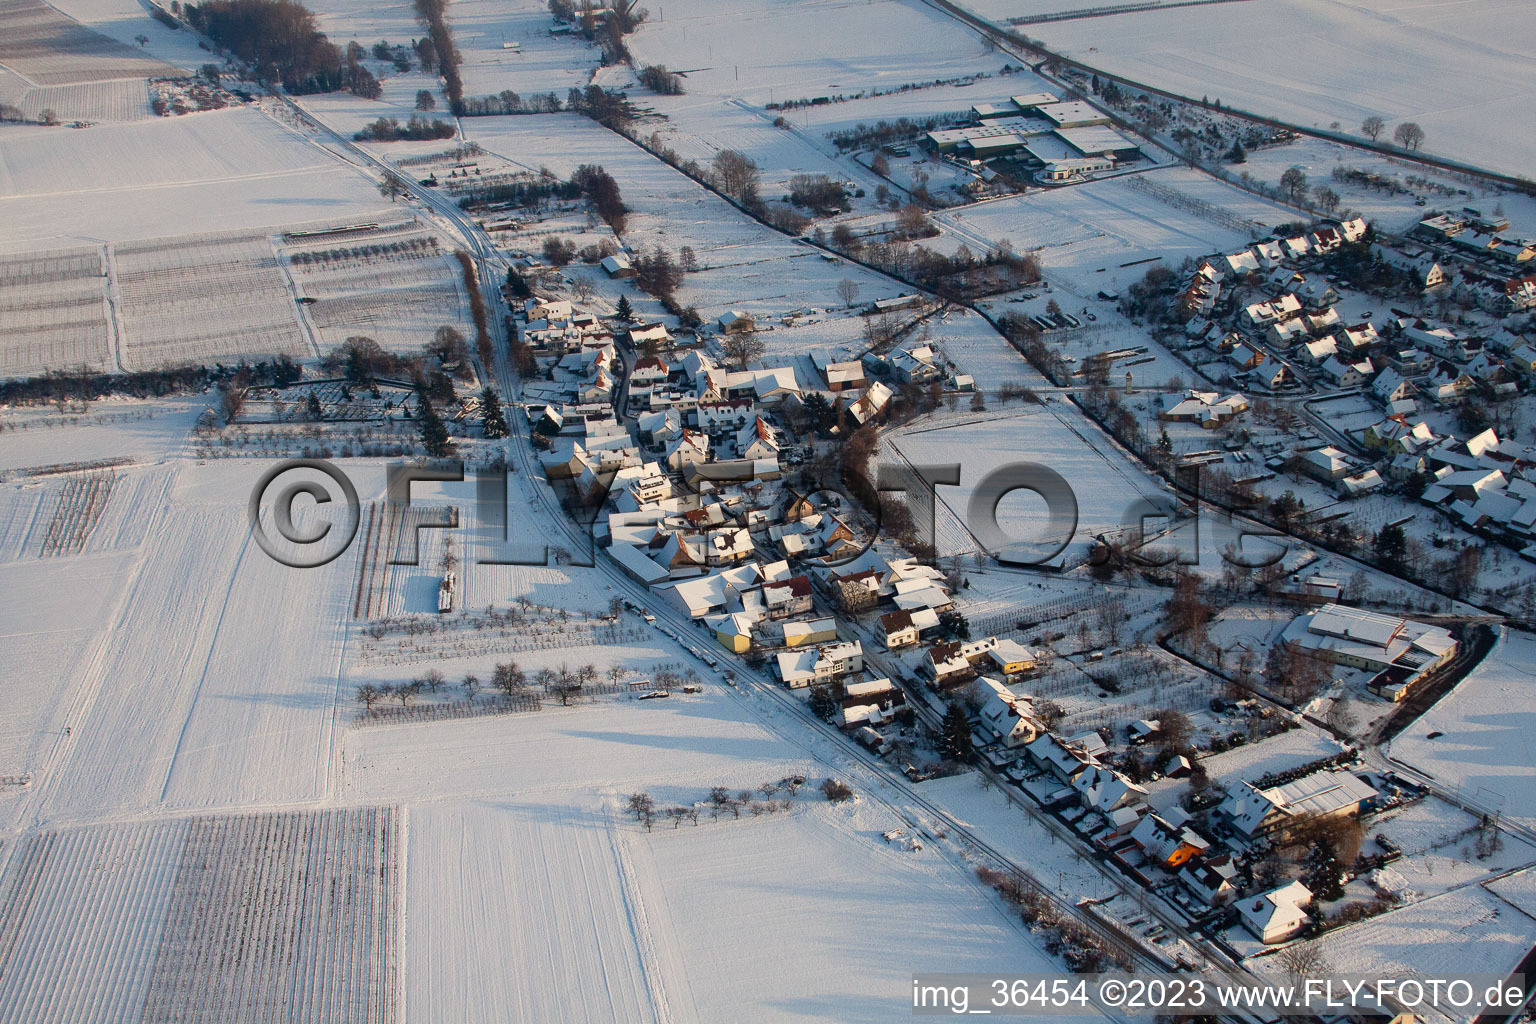 In winter/snow in the district Drusweiler in Kapellen-Drusweiler in the state Rhineland-Palatinate, Germany